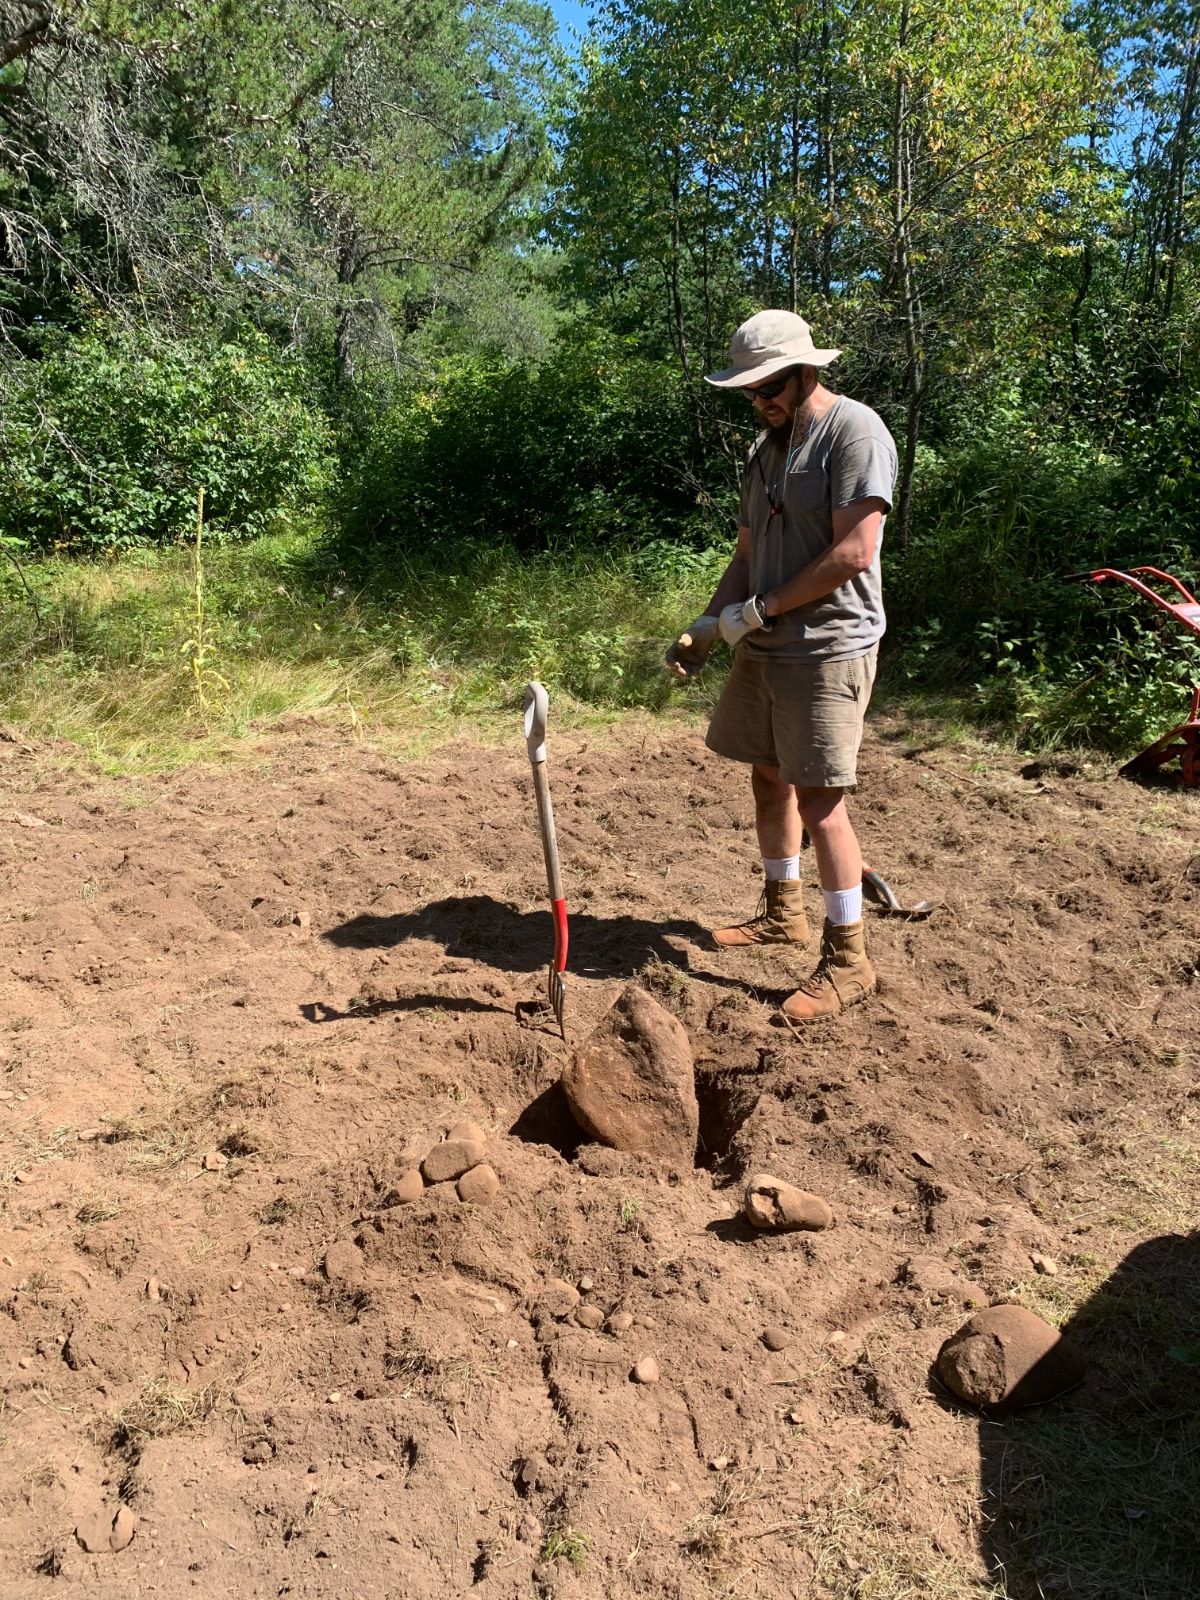 Man standing over a large rock in newly-tilled soil